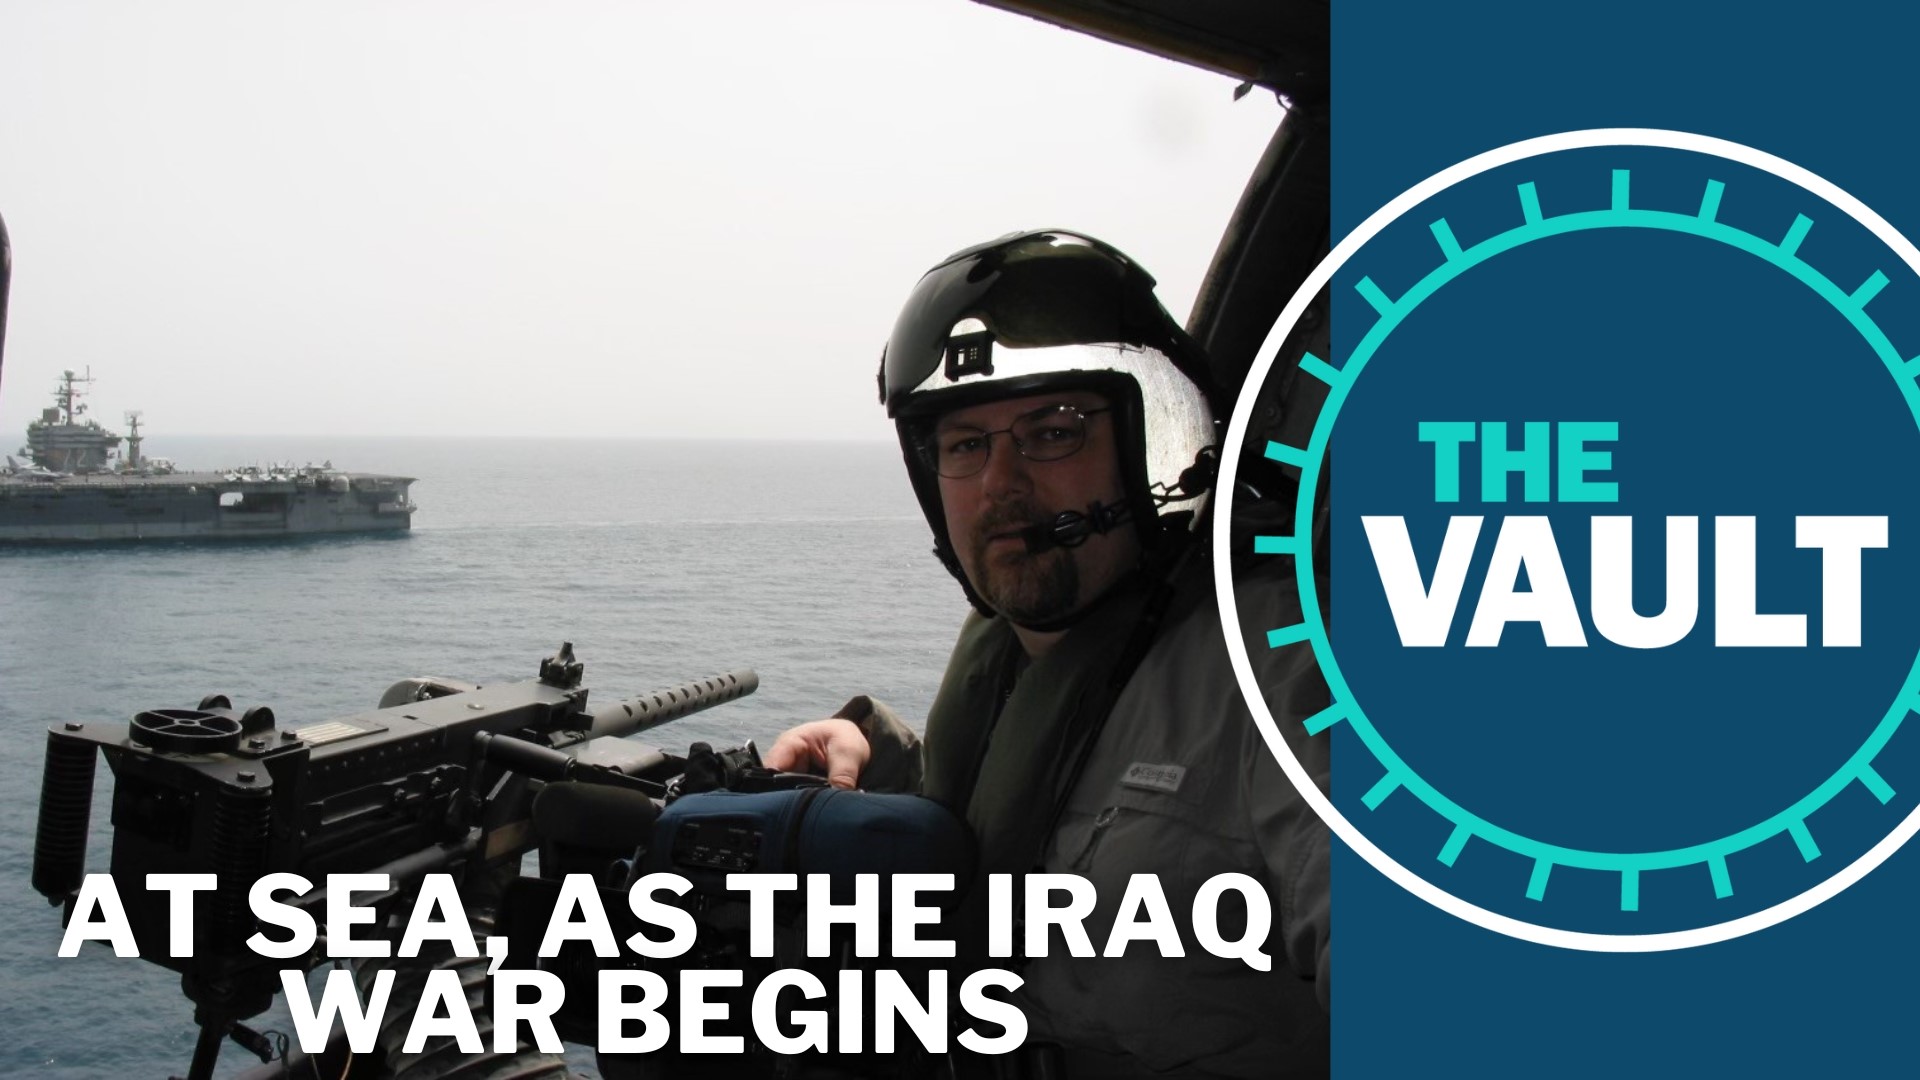 As the bombardment and invasion of Iraq unfolded, KGW’s Pat Dooris was on an aircraft carrier in the Persian Gulf. Here’s a look back at his reporting.